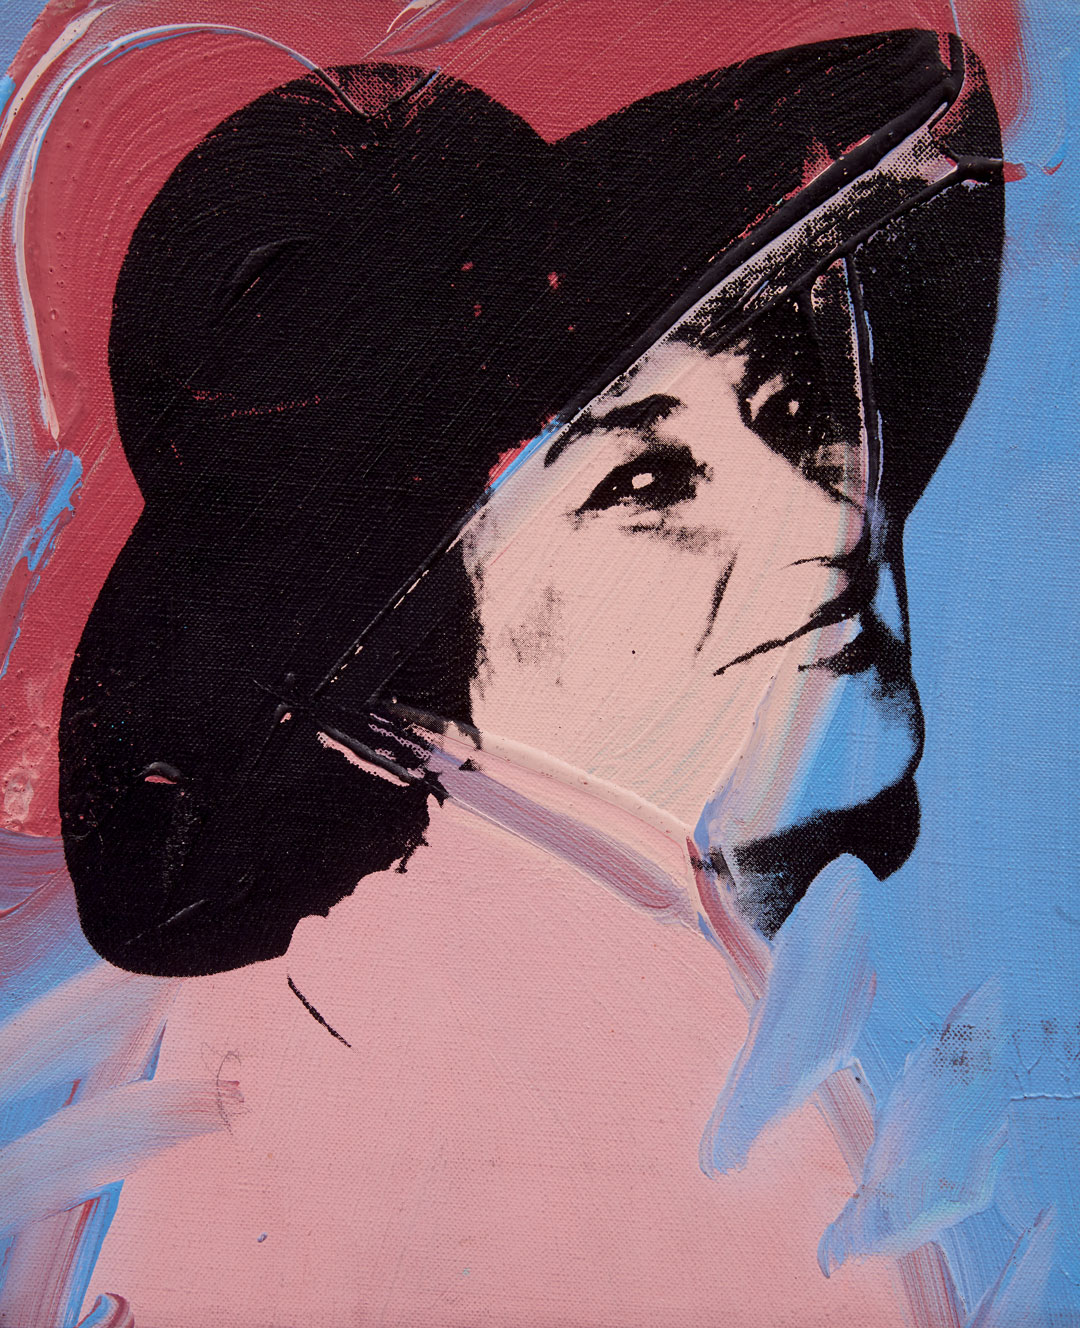 Andy Warhol, Bella Abzug, summer 1977, acrylic and silkscreen ink on linen, 12 x 10 inches, 30.5 x 25.4 cm. Picture credit: Private Collection © The Andy Warhol Foundation for the Visual Arts, Inc., NY Photo by Jordan Tinker